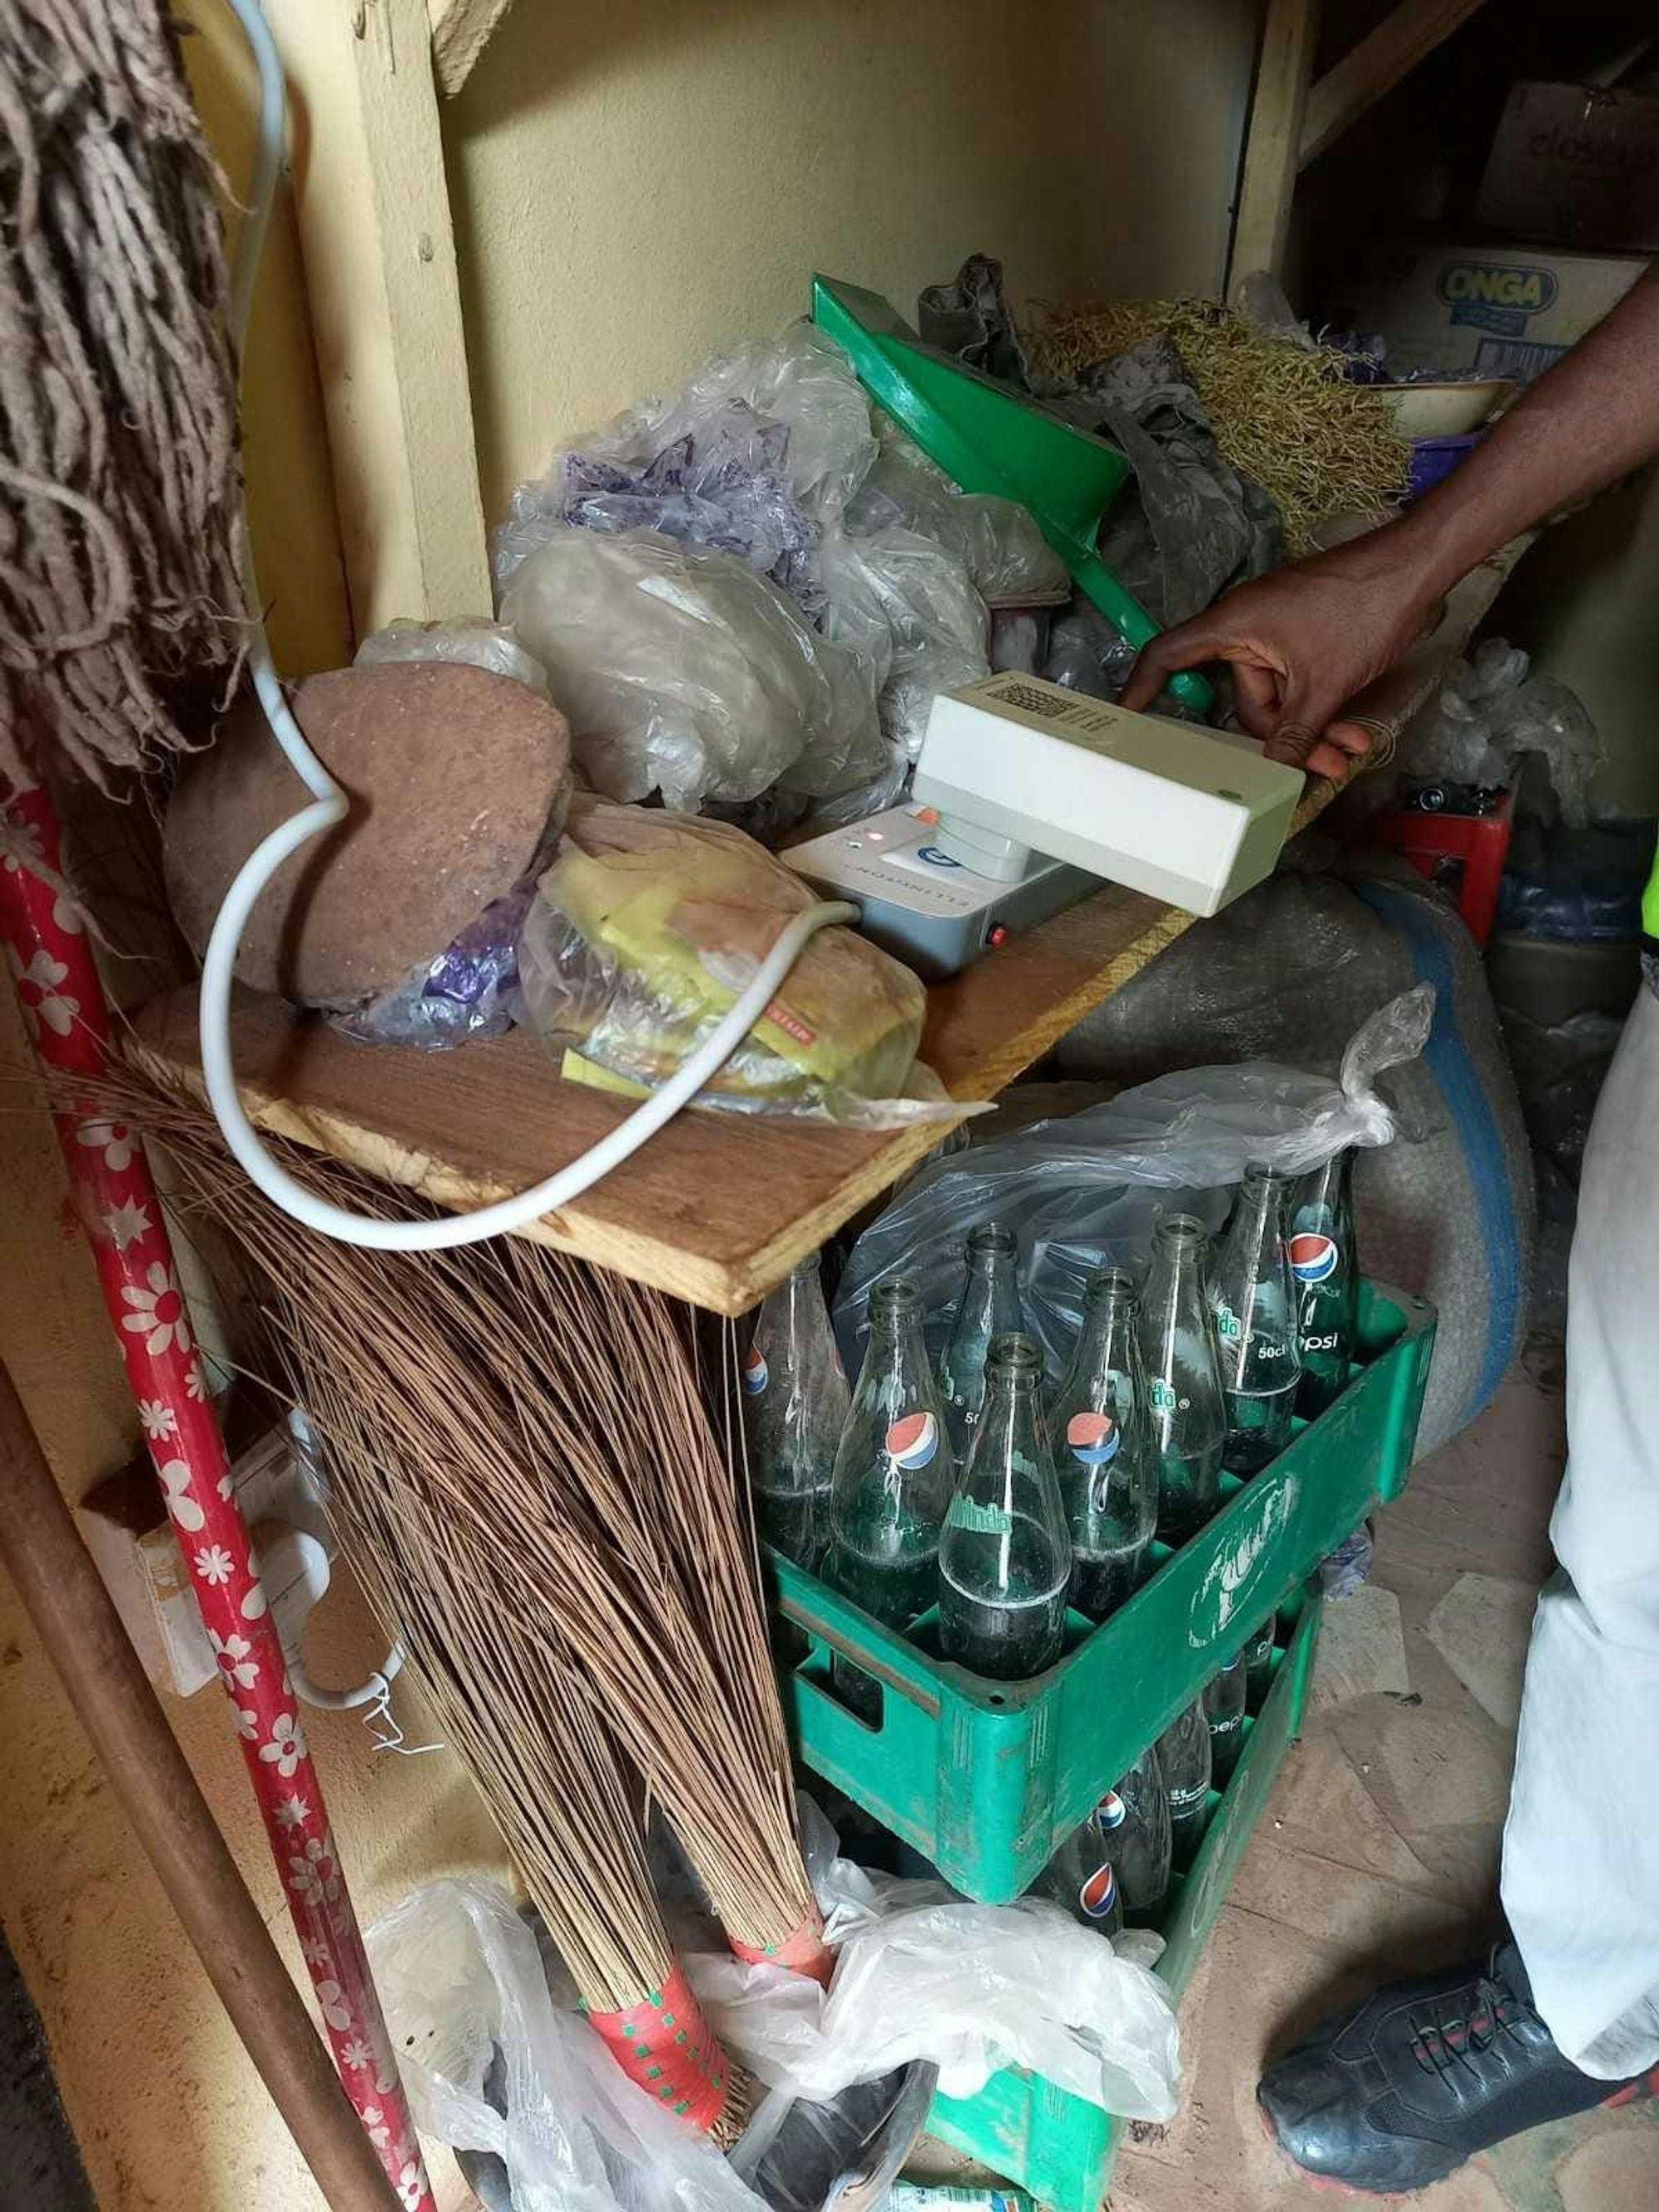 Photos of GridWatch sensors installed in homes and business. Top and bottom: Sensors in shops in Aria New Market, Enugu State, Nigeria. Sensors are collecting baseline measurements on the state of power in select markets across the country. (Photo Credit: Deborah Braide).